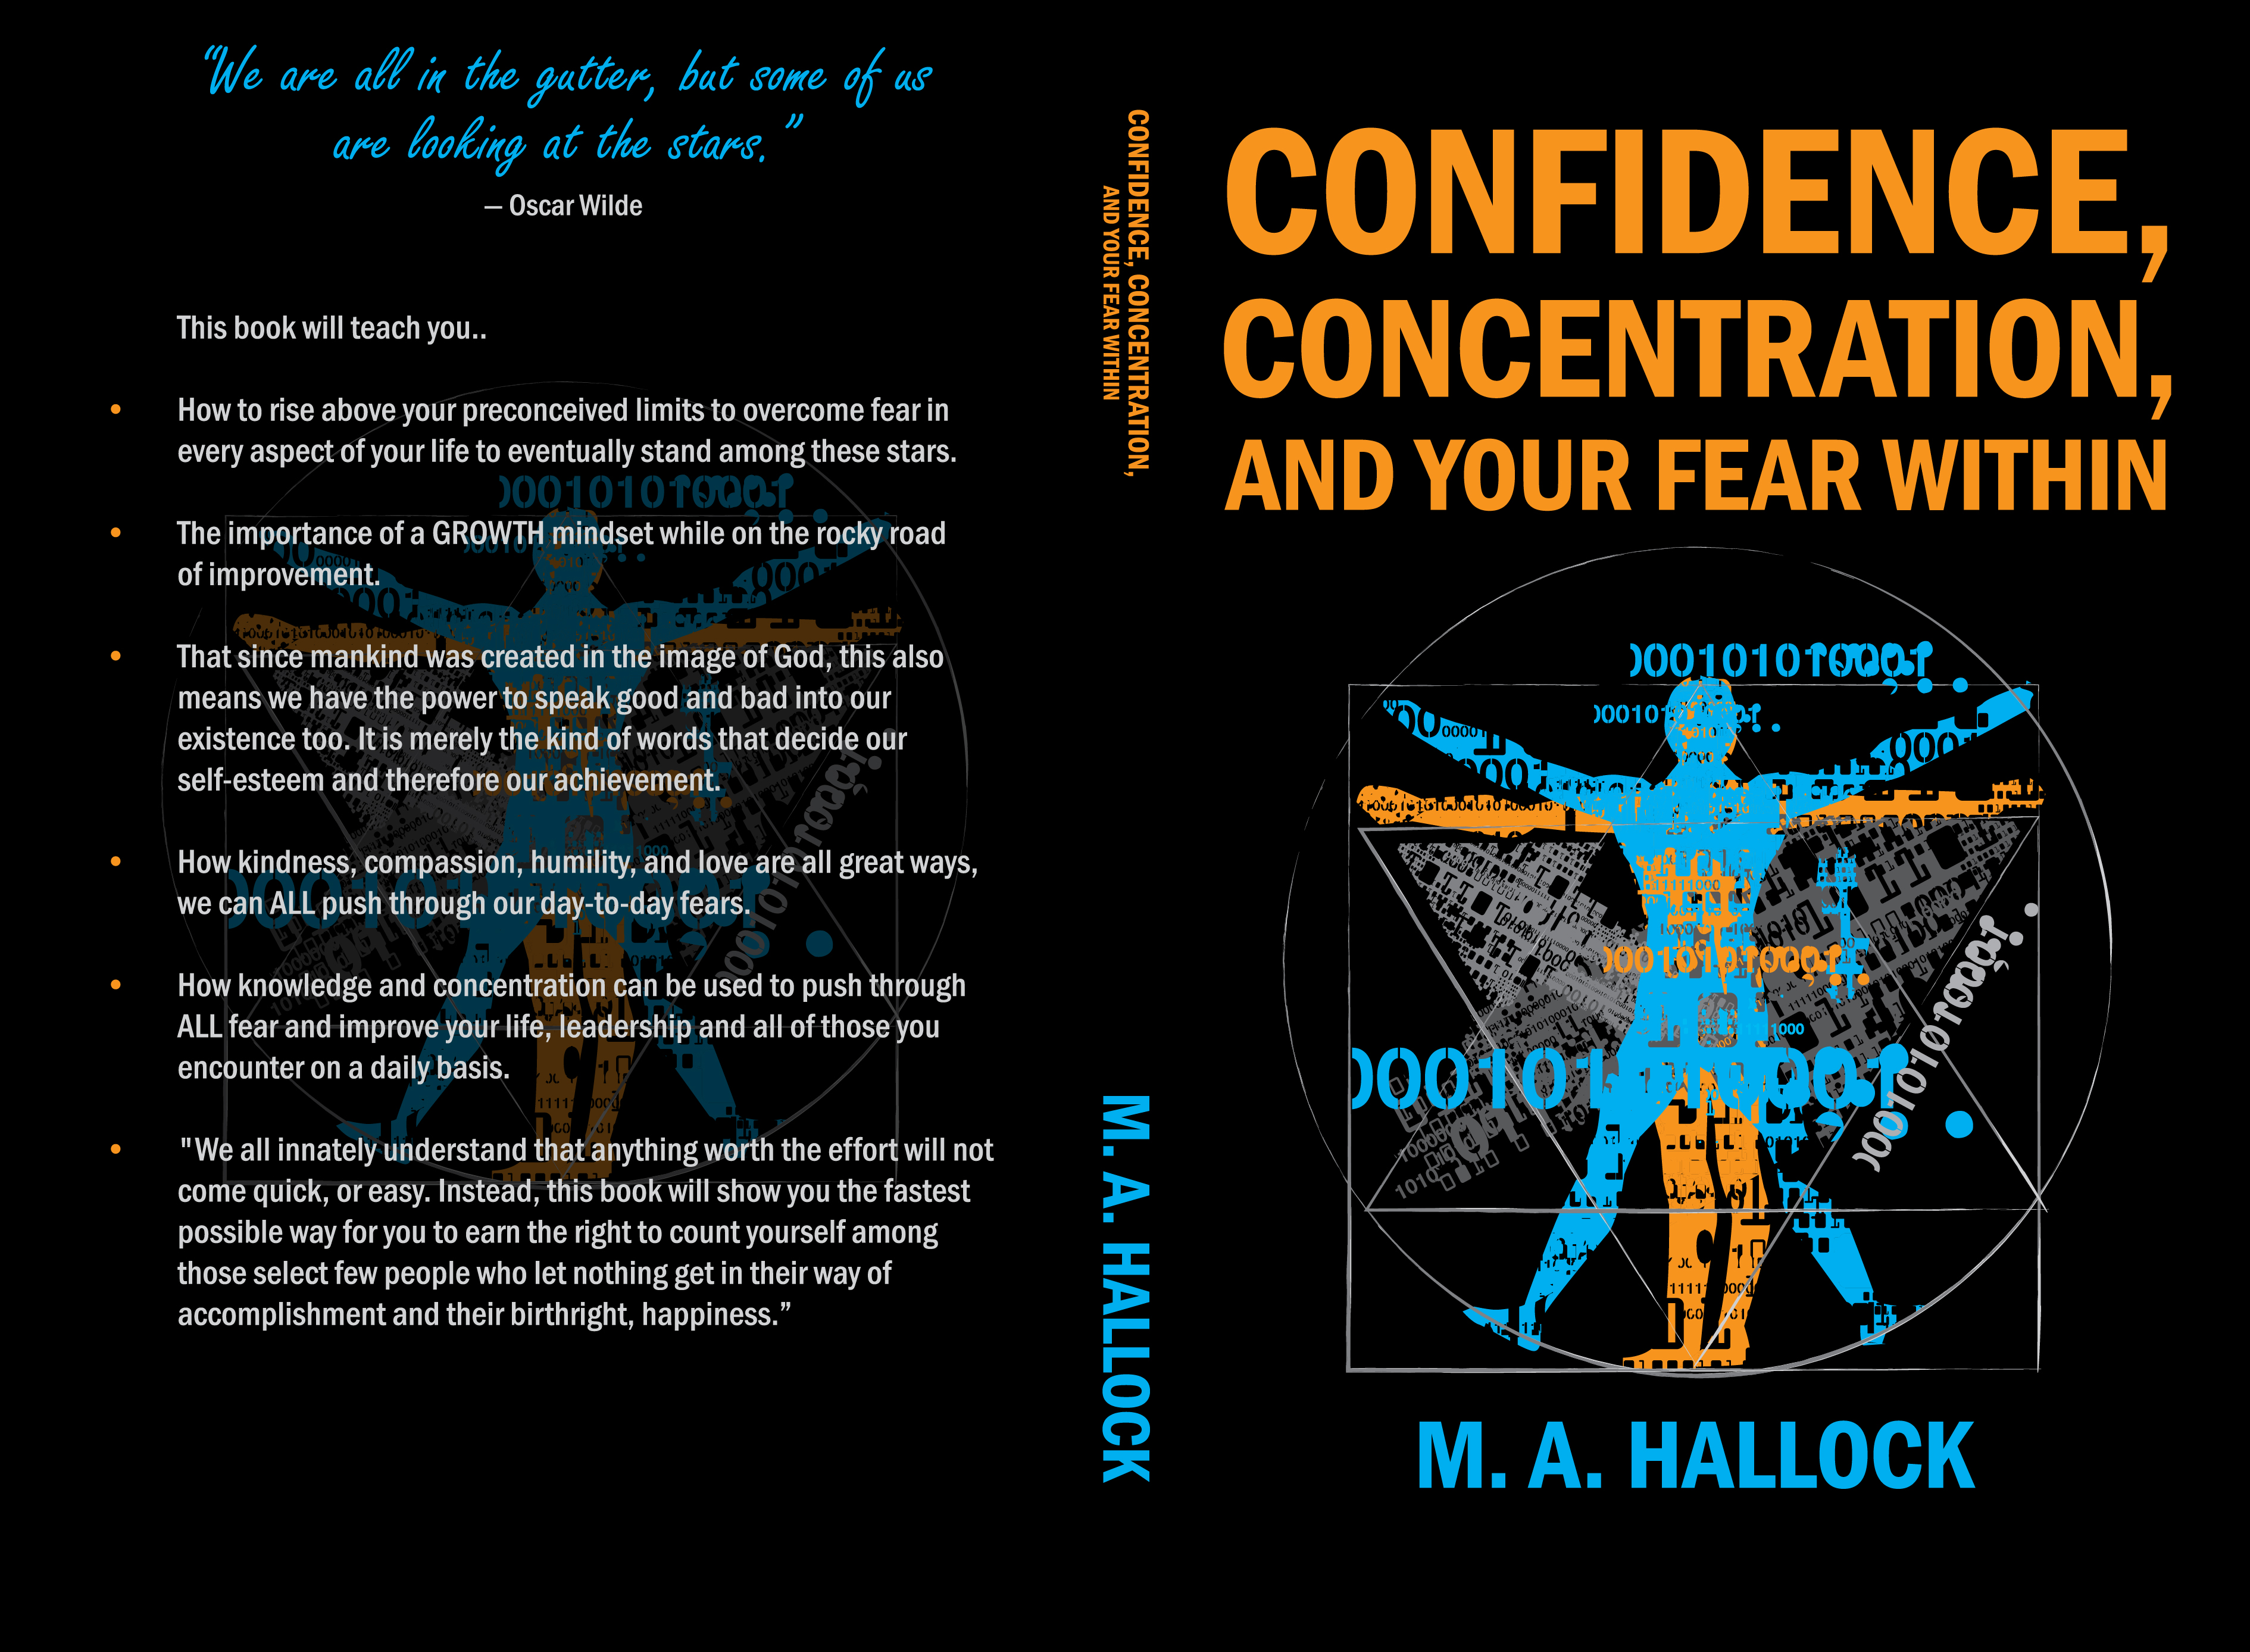 FREE: Confidence, Concentration And Your Fear Within: An Introductory Guide To Overcoming Fear by M.A. Hallock